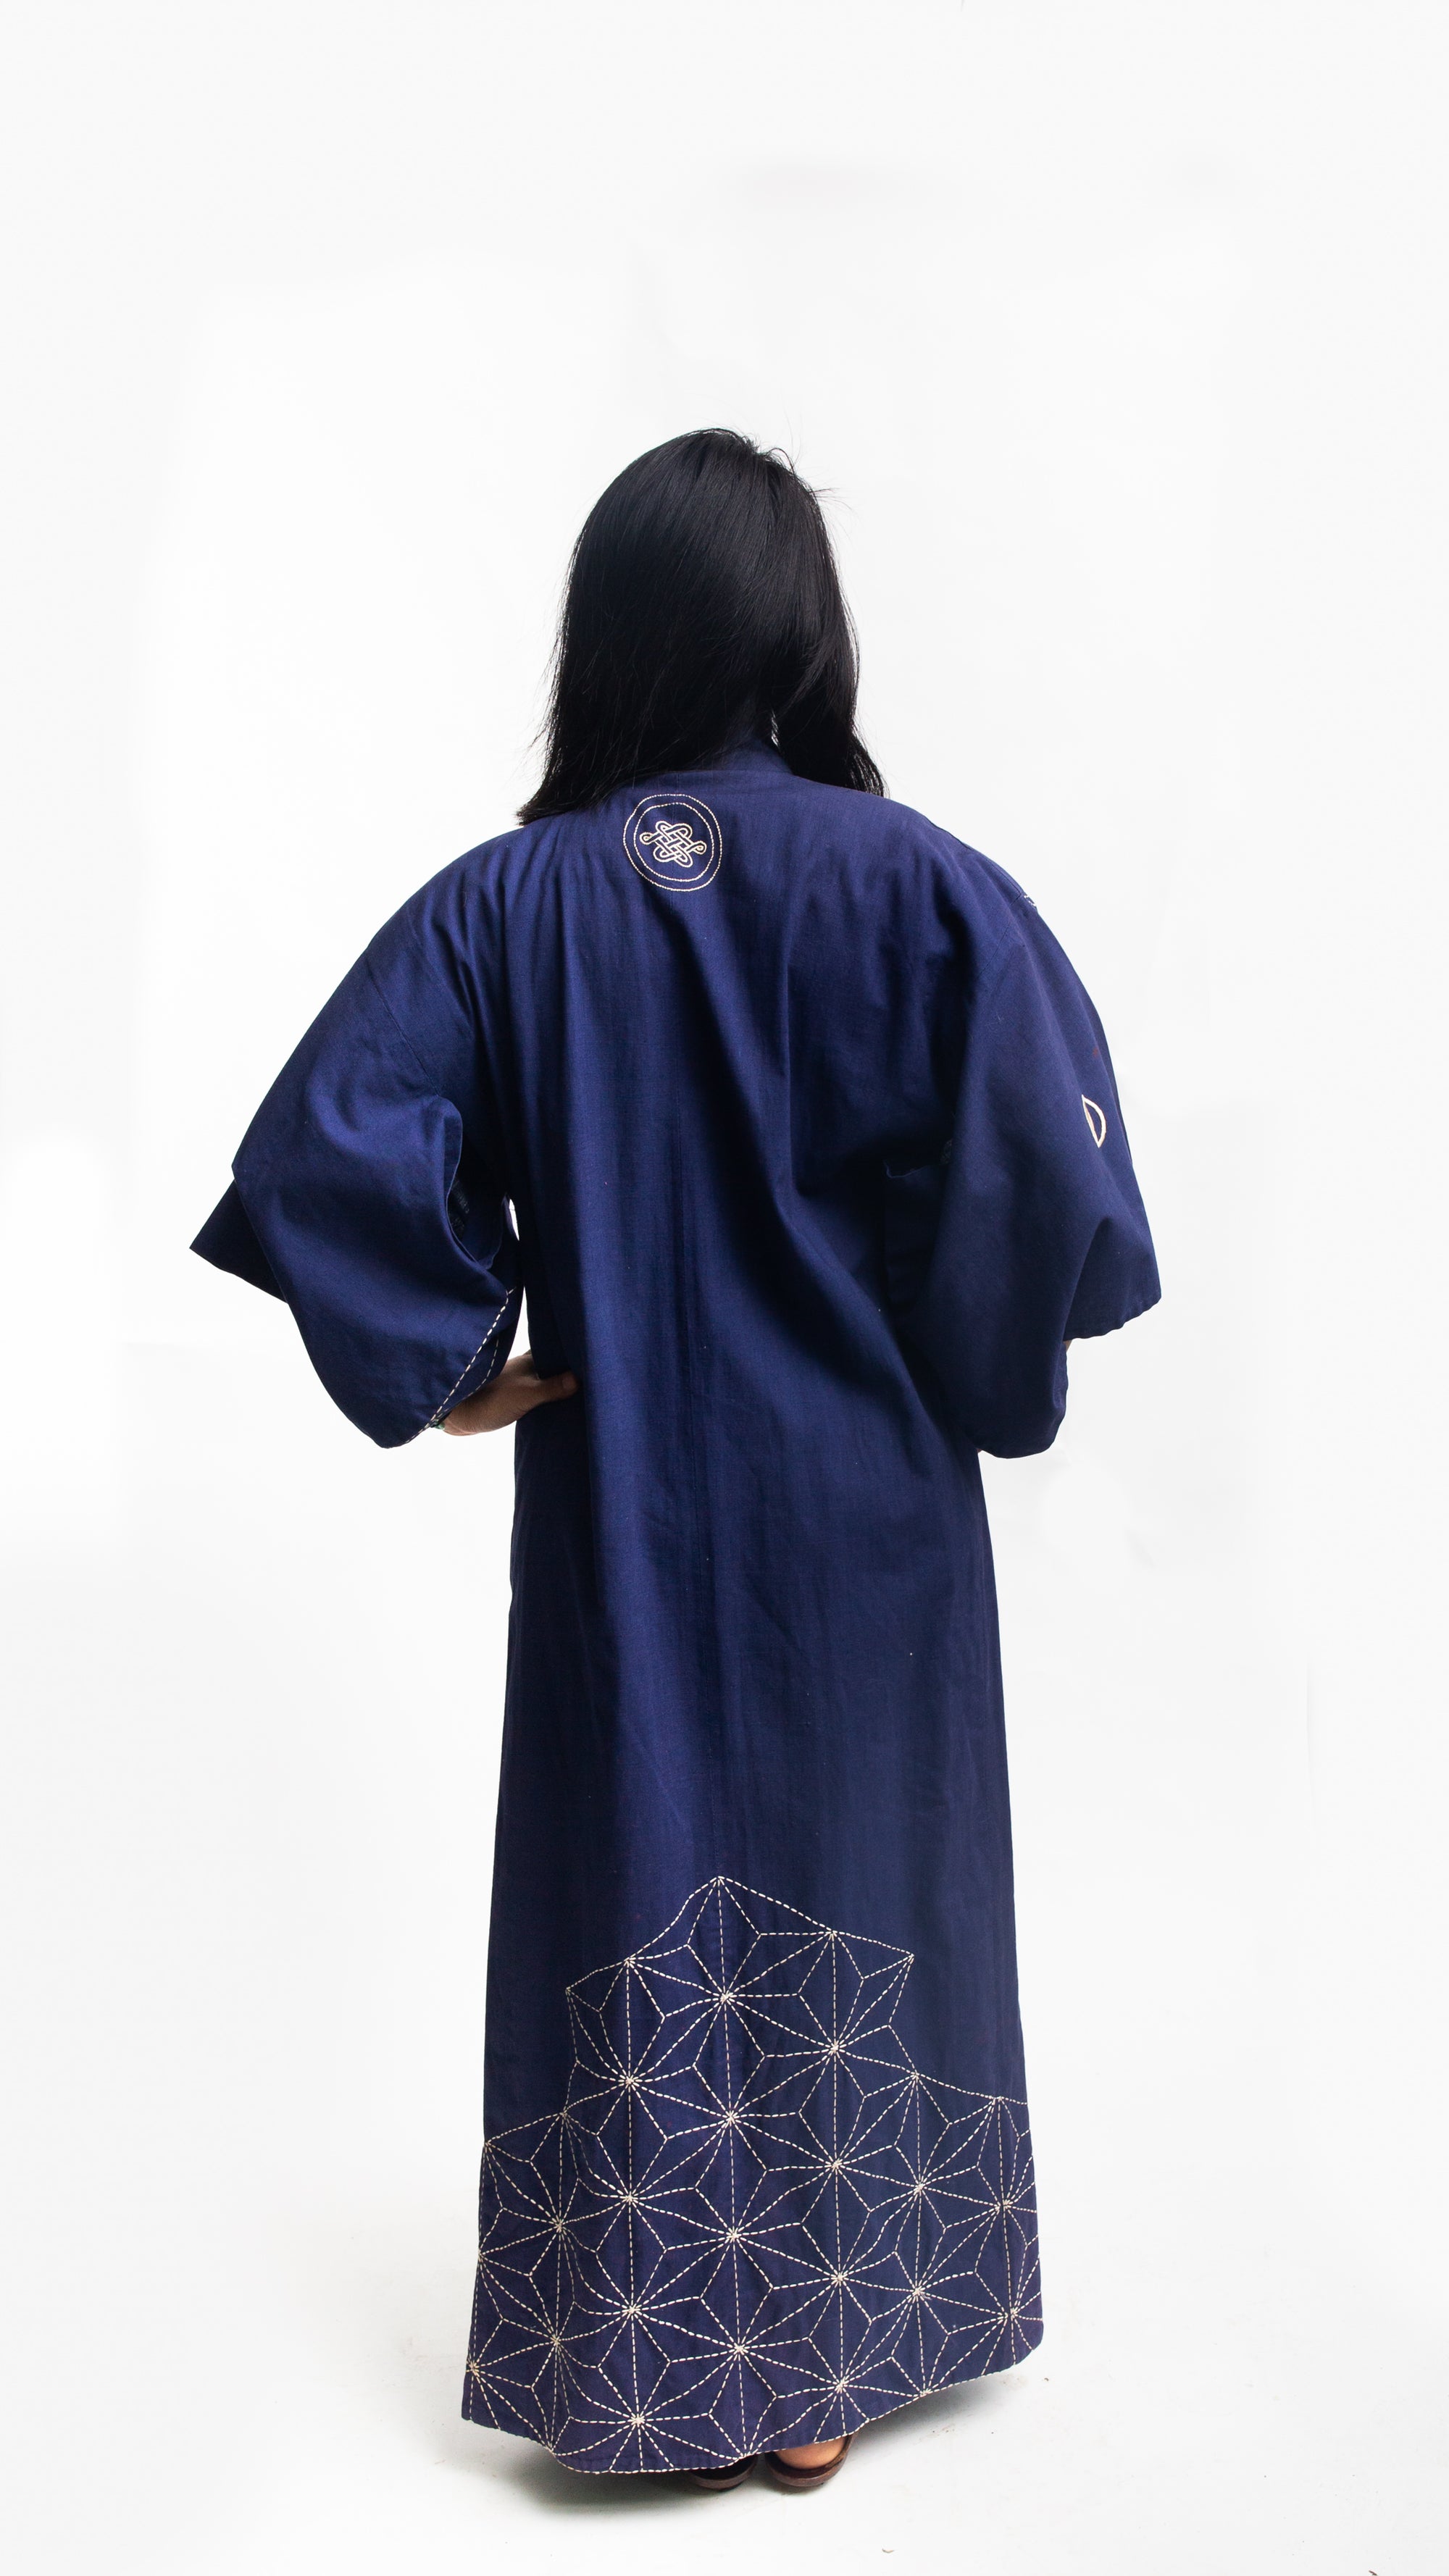 Asian American woman wearing a navy embroidered kimono standing in front of a white background. Back view with sashiko embroidery.